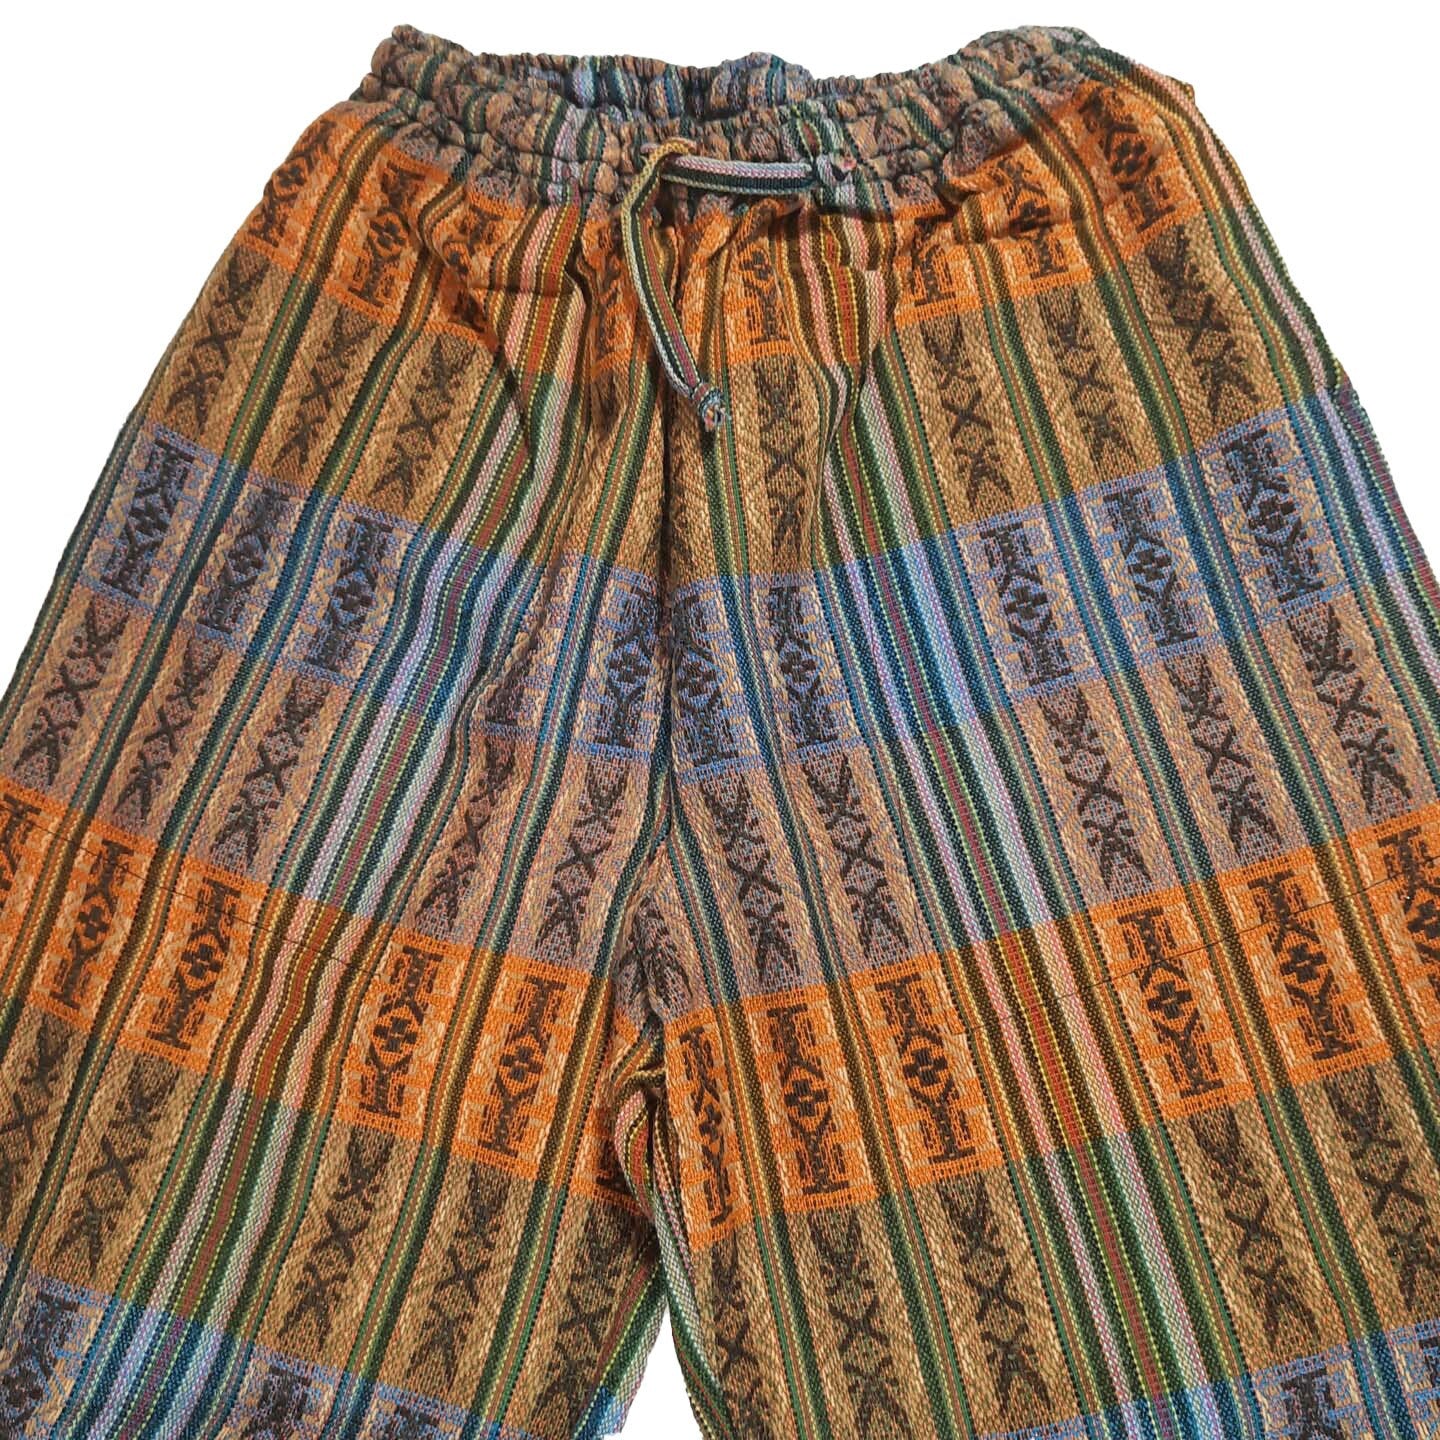 Pants Size L | Hippie Pants | Loungewear Womens Pants | Comfy Clothes | Mens Pants with Hidden Pockets | Earthy Orange | Father's Day Gift